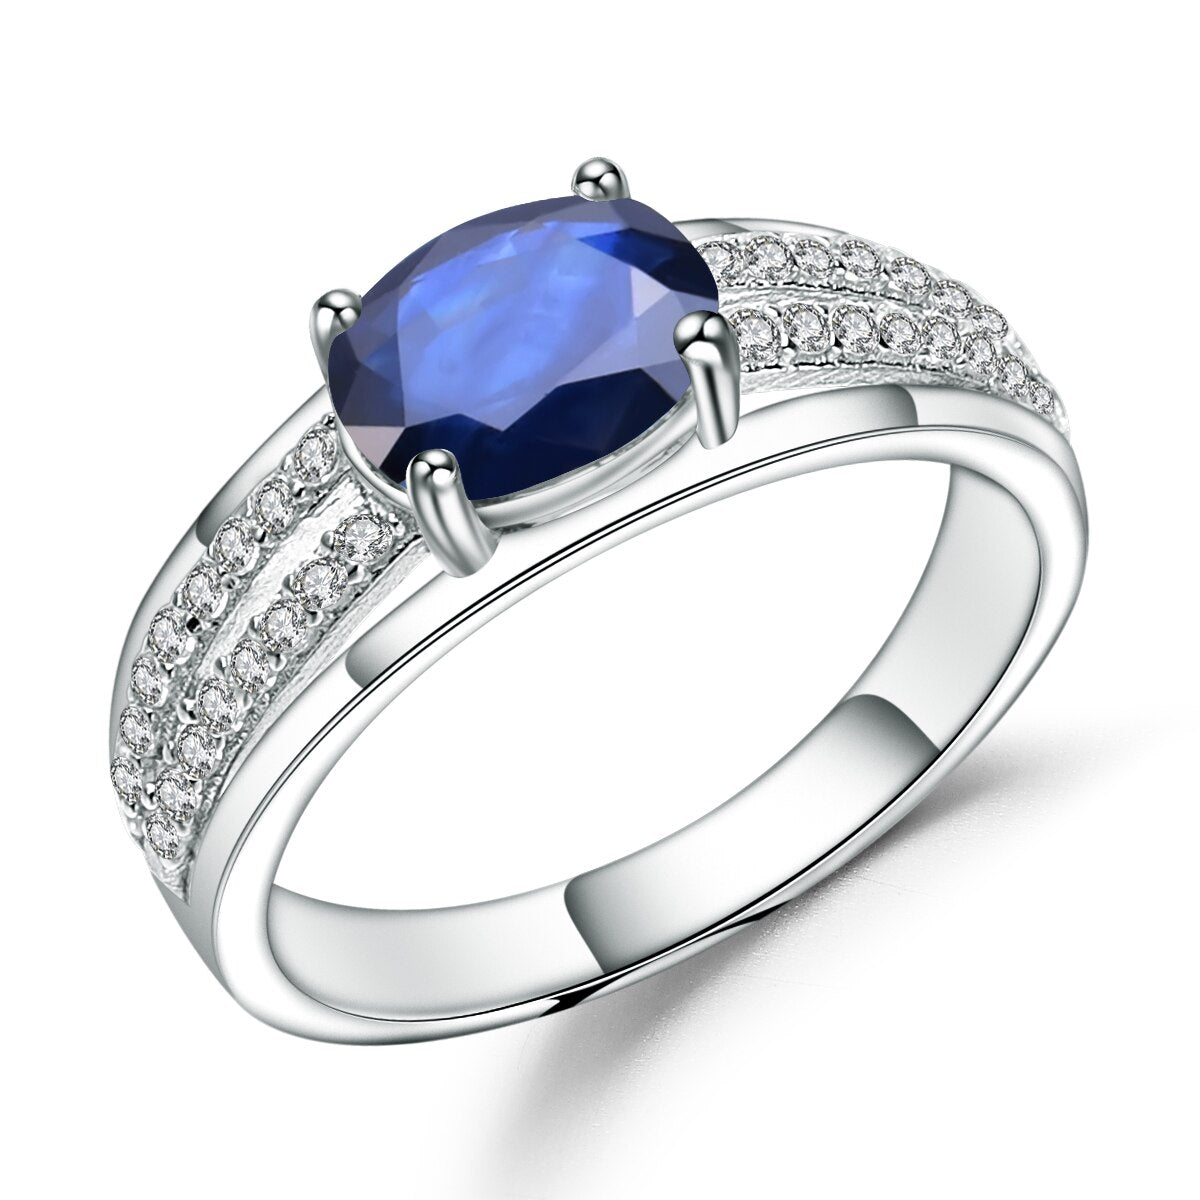 GEM&#39;S BALLET 1.66Ct Oval Natural Blue Sapphire Gemstone Ring 925 Sterling Silver Wedding Rings for Women Classic Fine Jewelry Sapphire|925 Sterling Silver